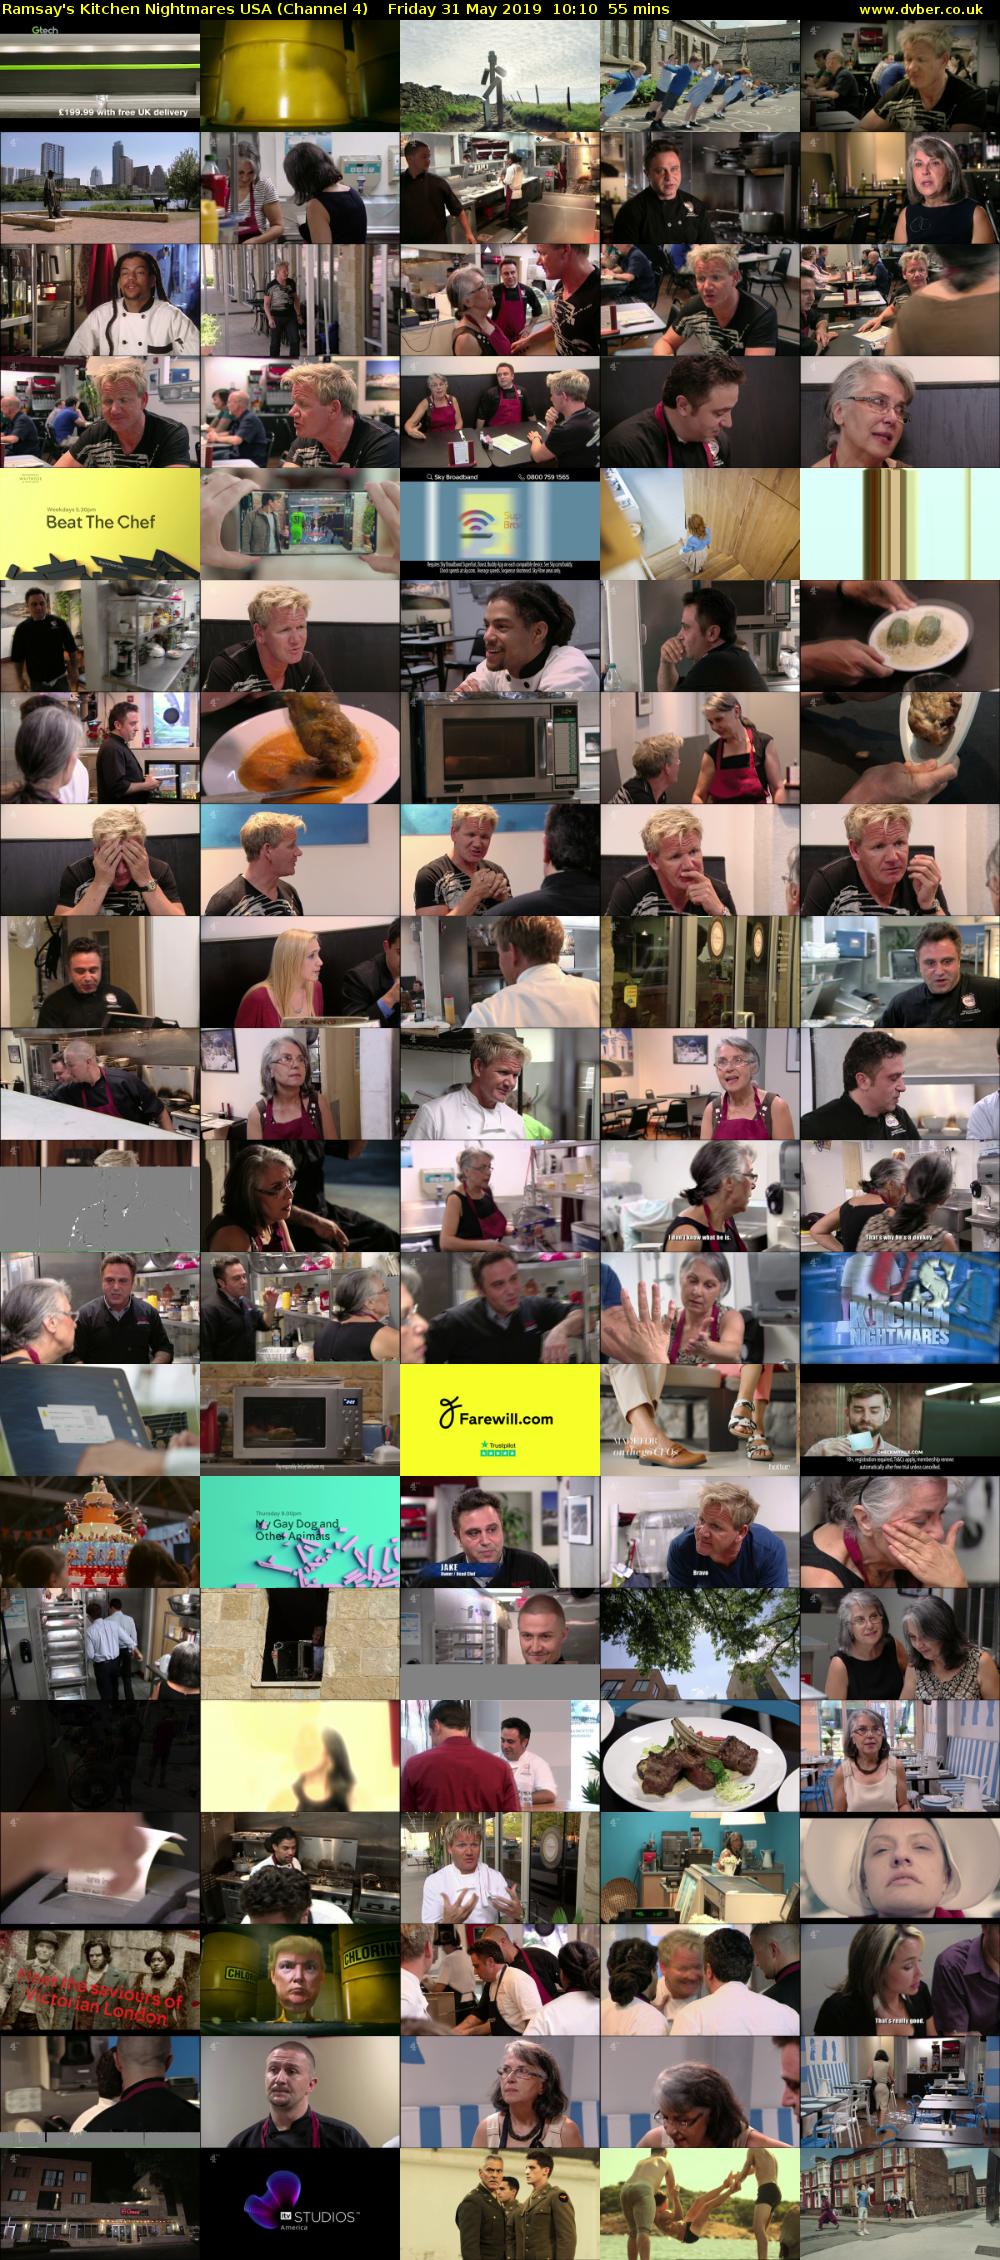 Ramsay's Kitchen Nightmares USA (Channel 4) Friday 31 May 2019 10:10 - 11:05